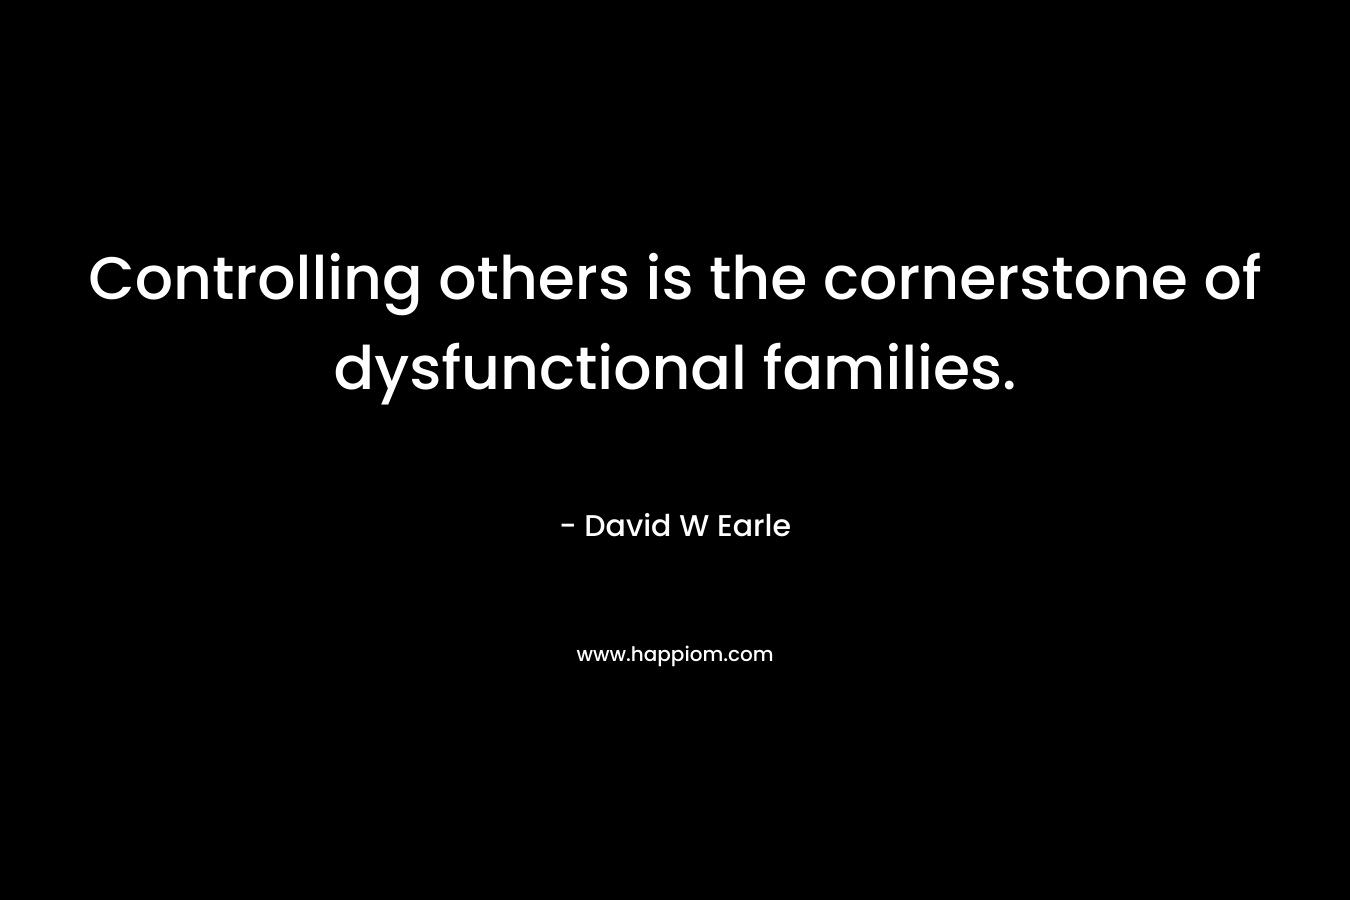 Controlling others is the cornerstone of dysfunctional families.